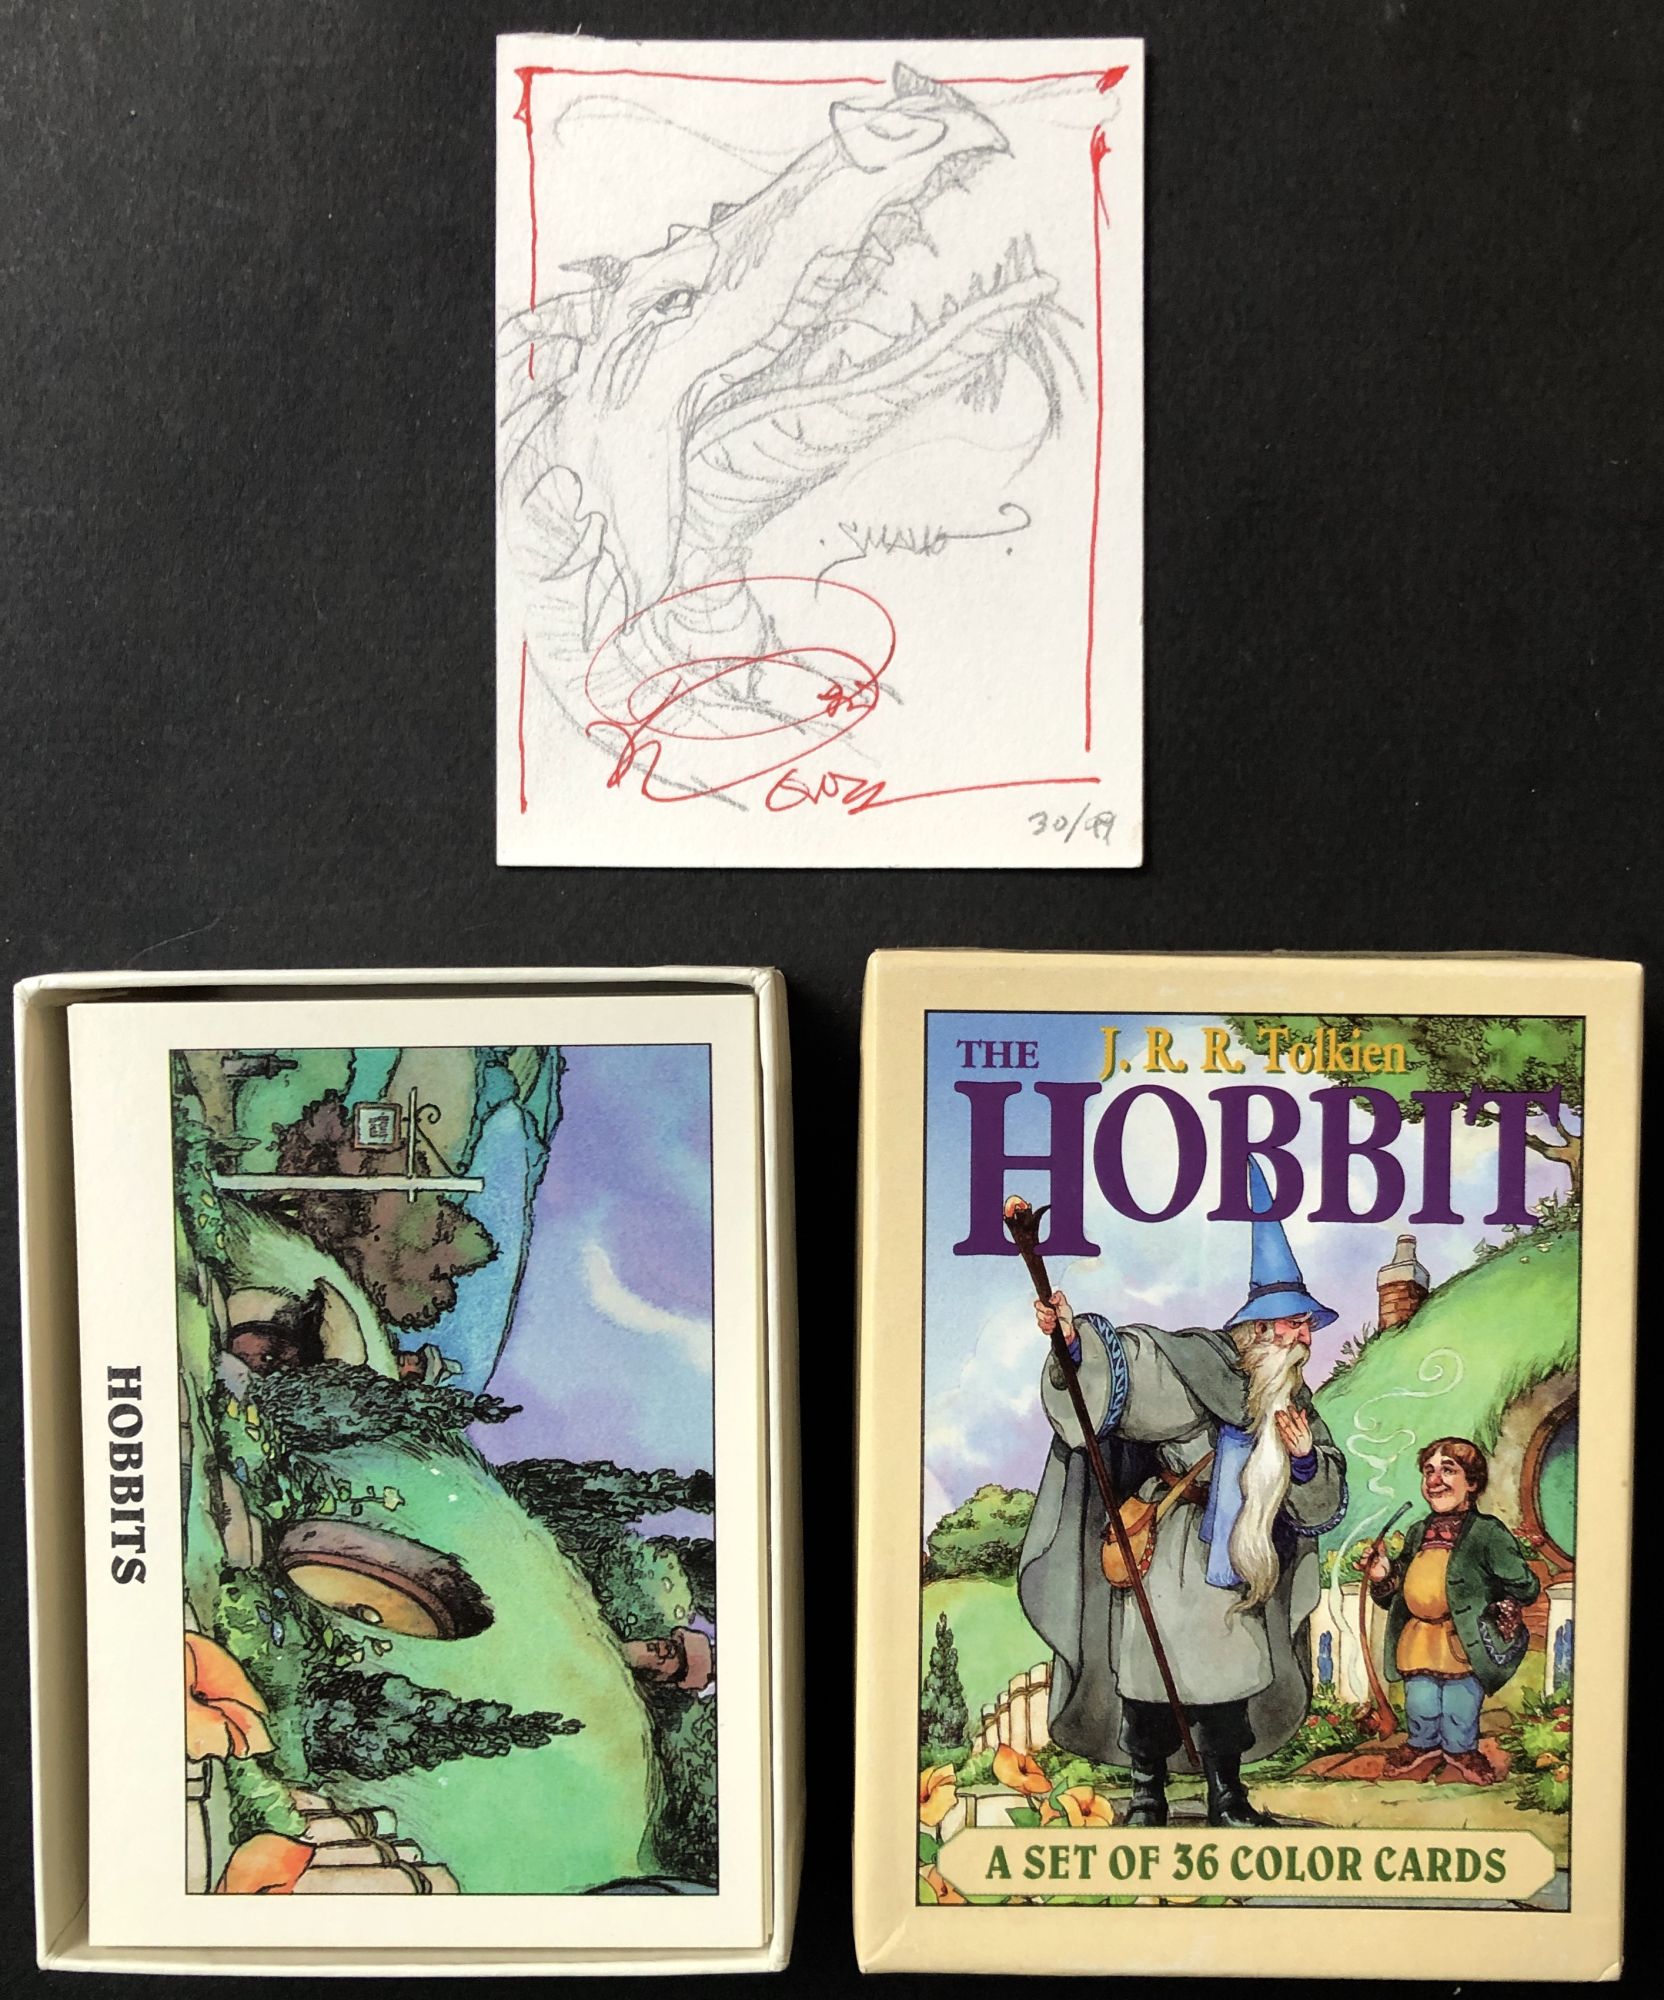 The Hobbit, Set of 36 Color Cards with original drawing of Smaug the